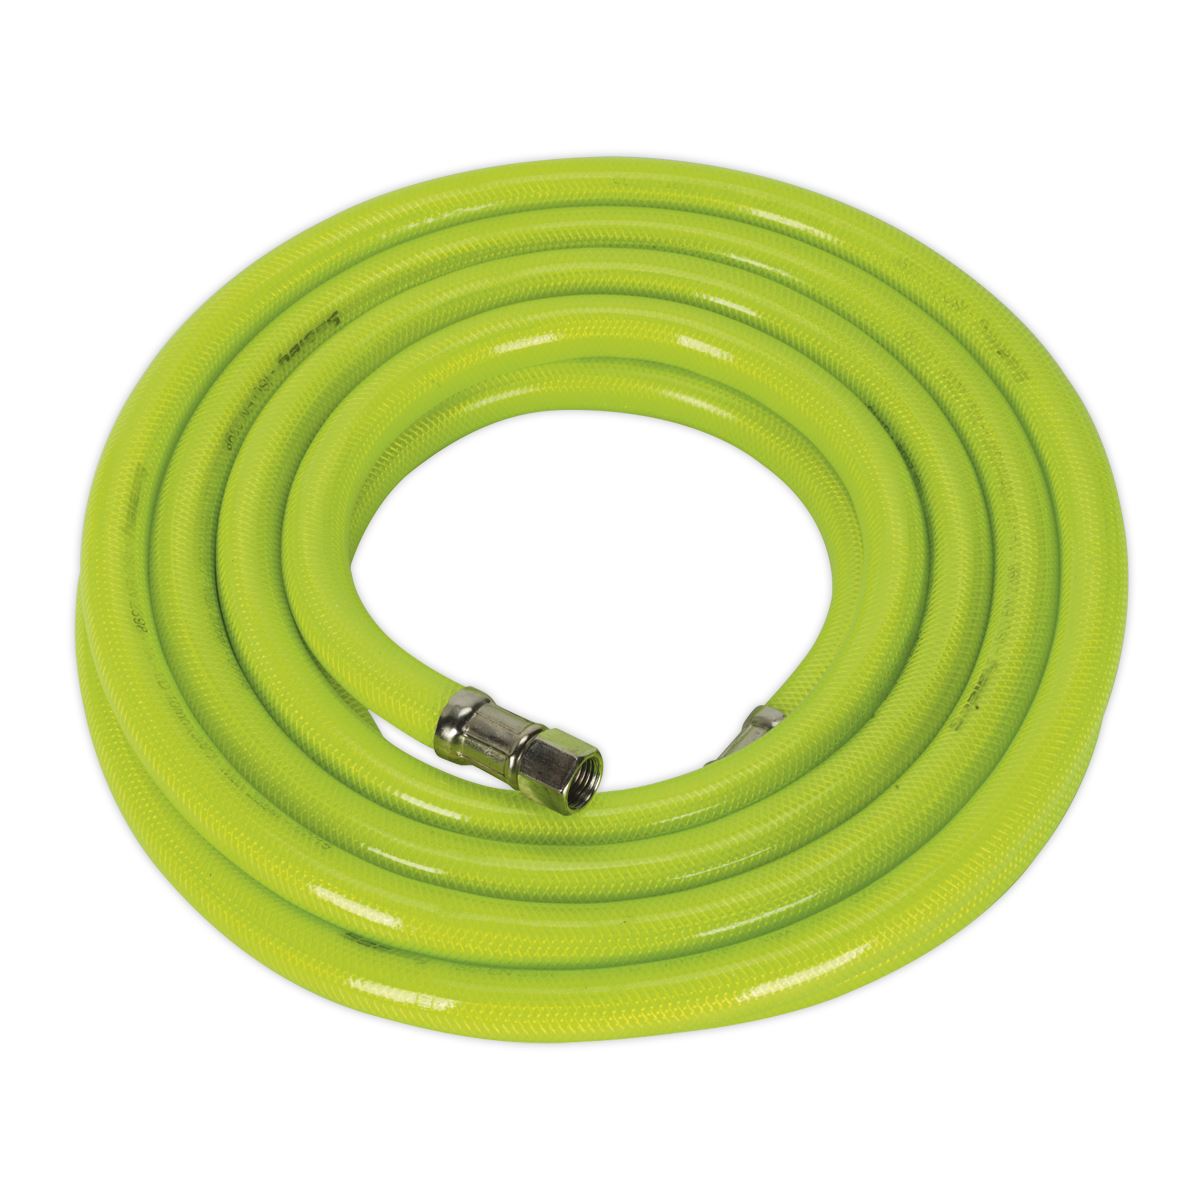 Sealey Air Hose High-Visibility 5m x Ø10mm with 1/4"BSP Unions